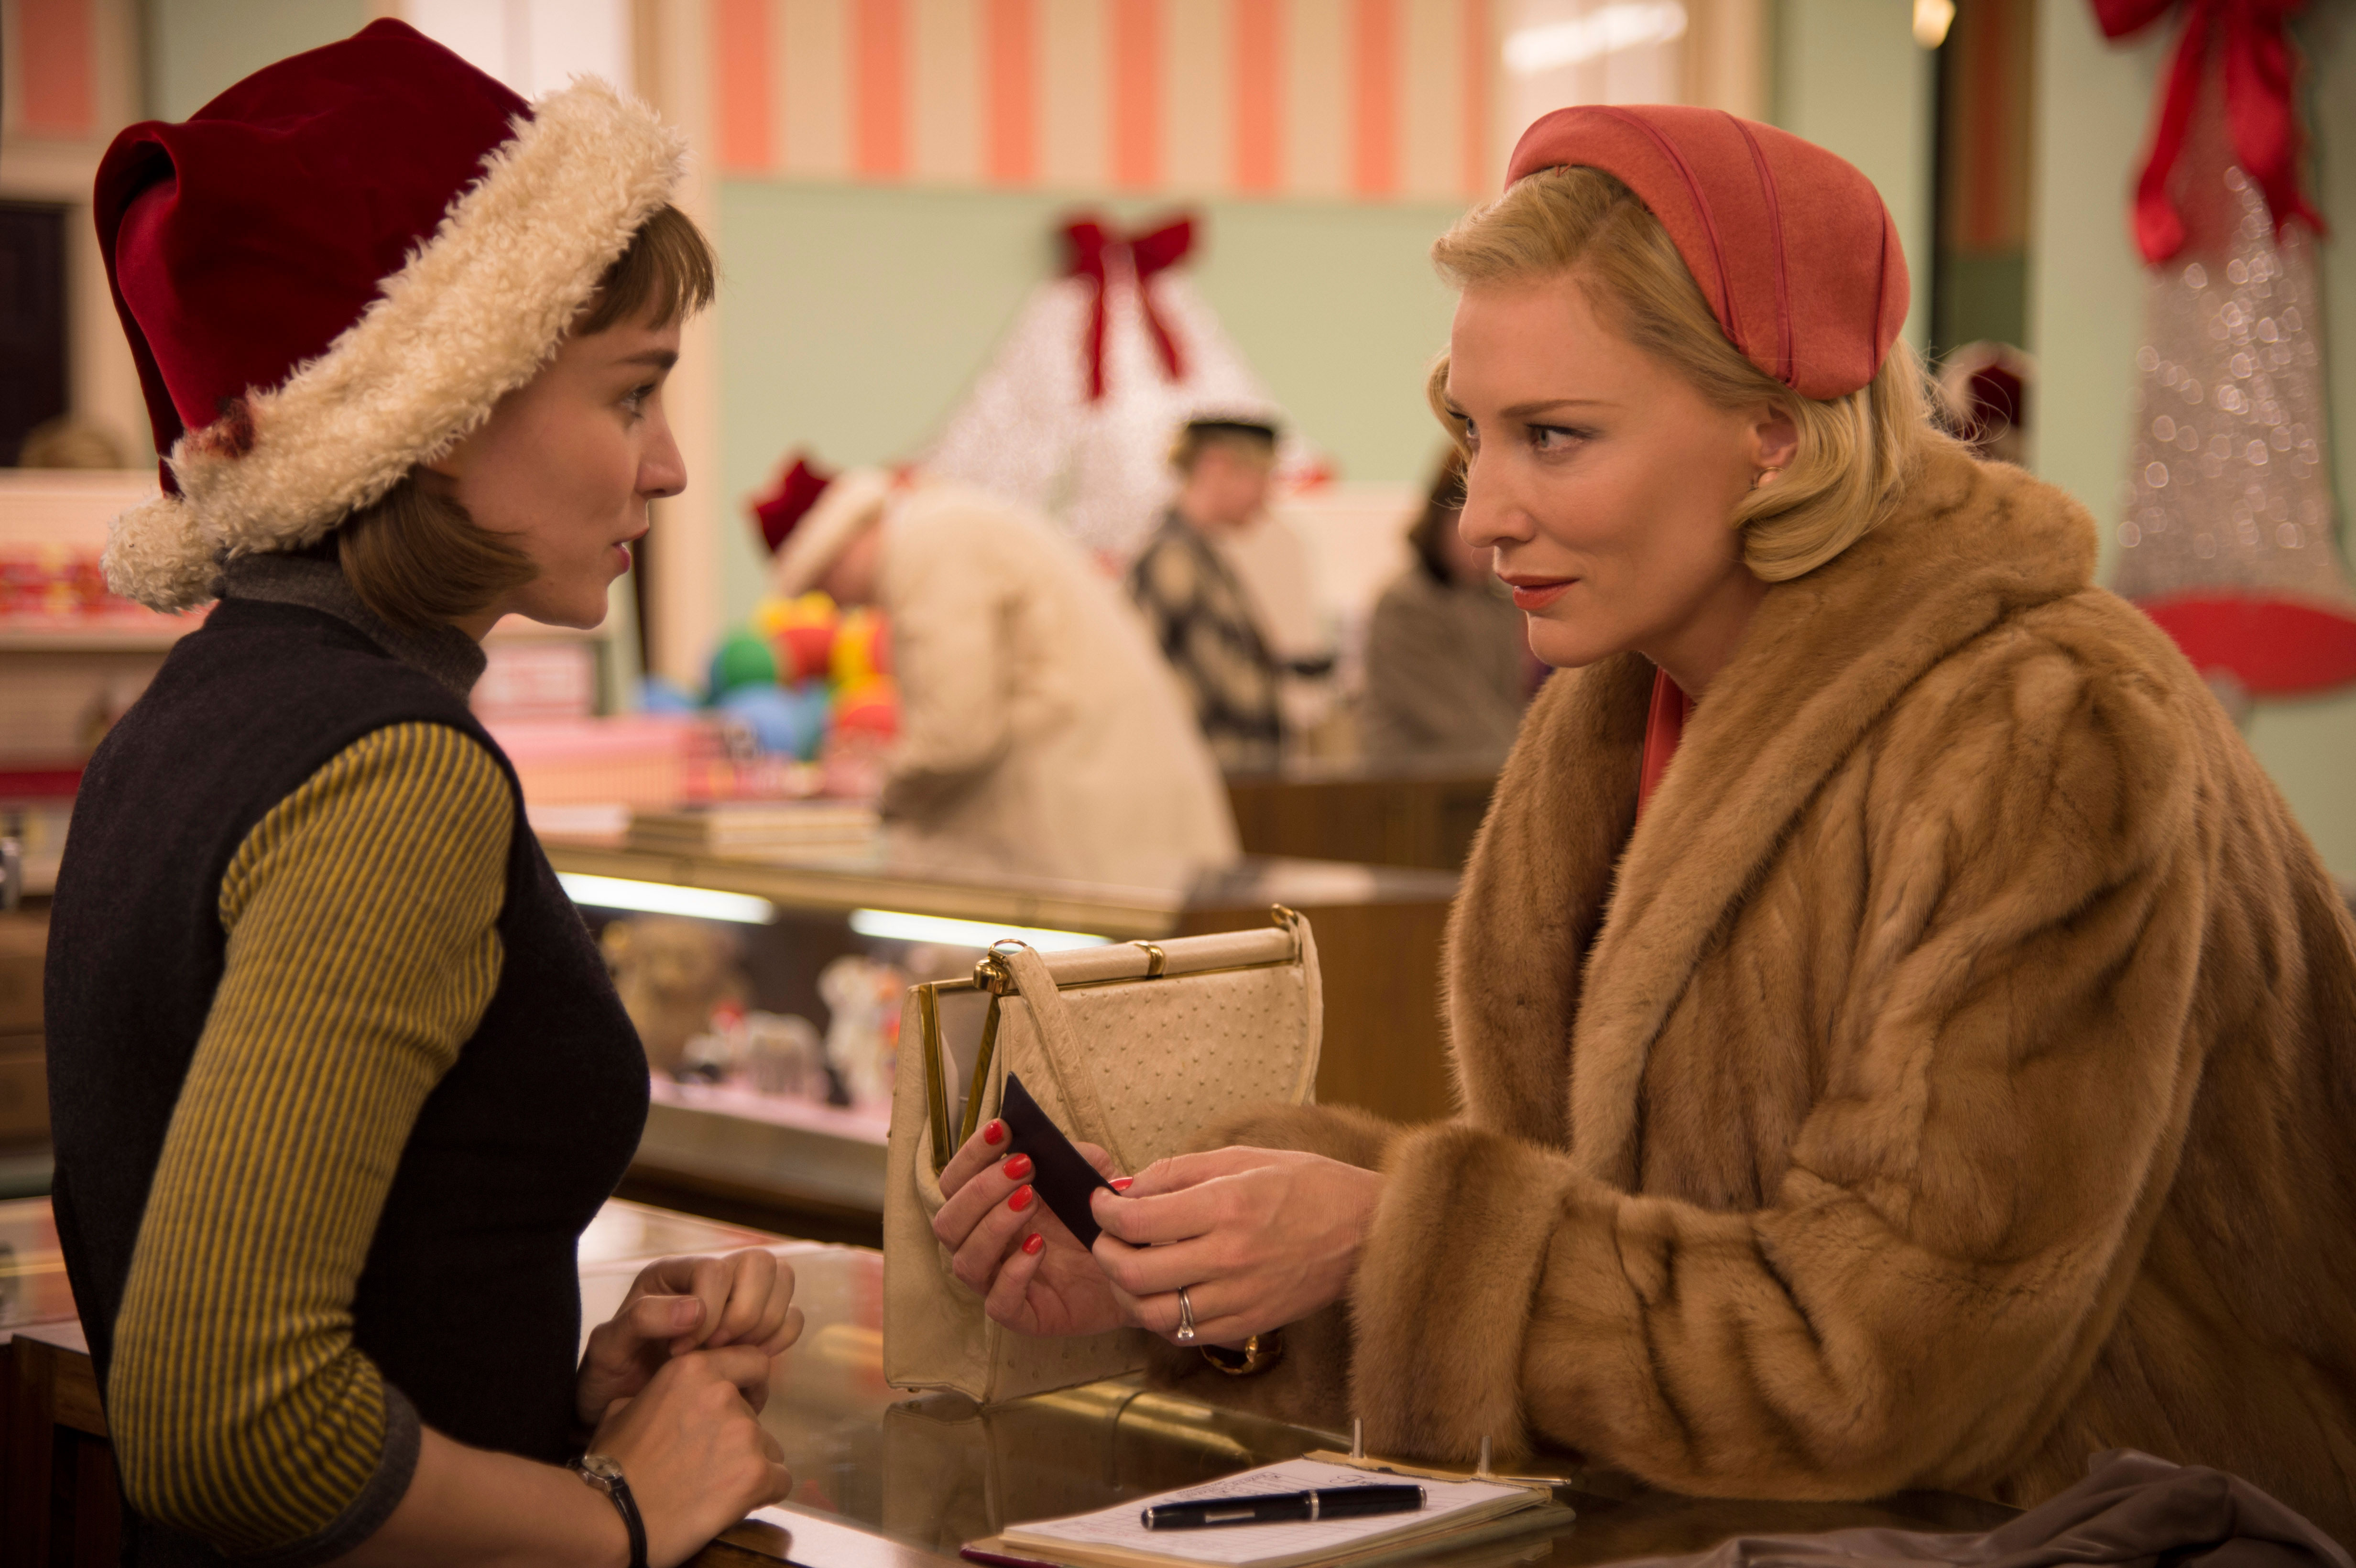 Believe the Hype—Cate Blanchett and Rooney Mara are Tremendous in